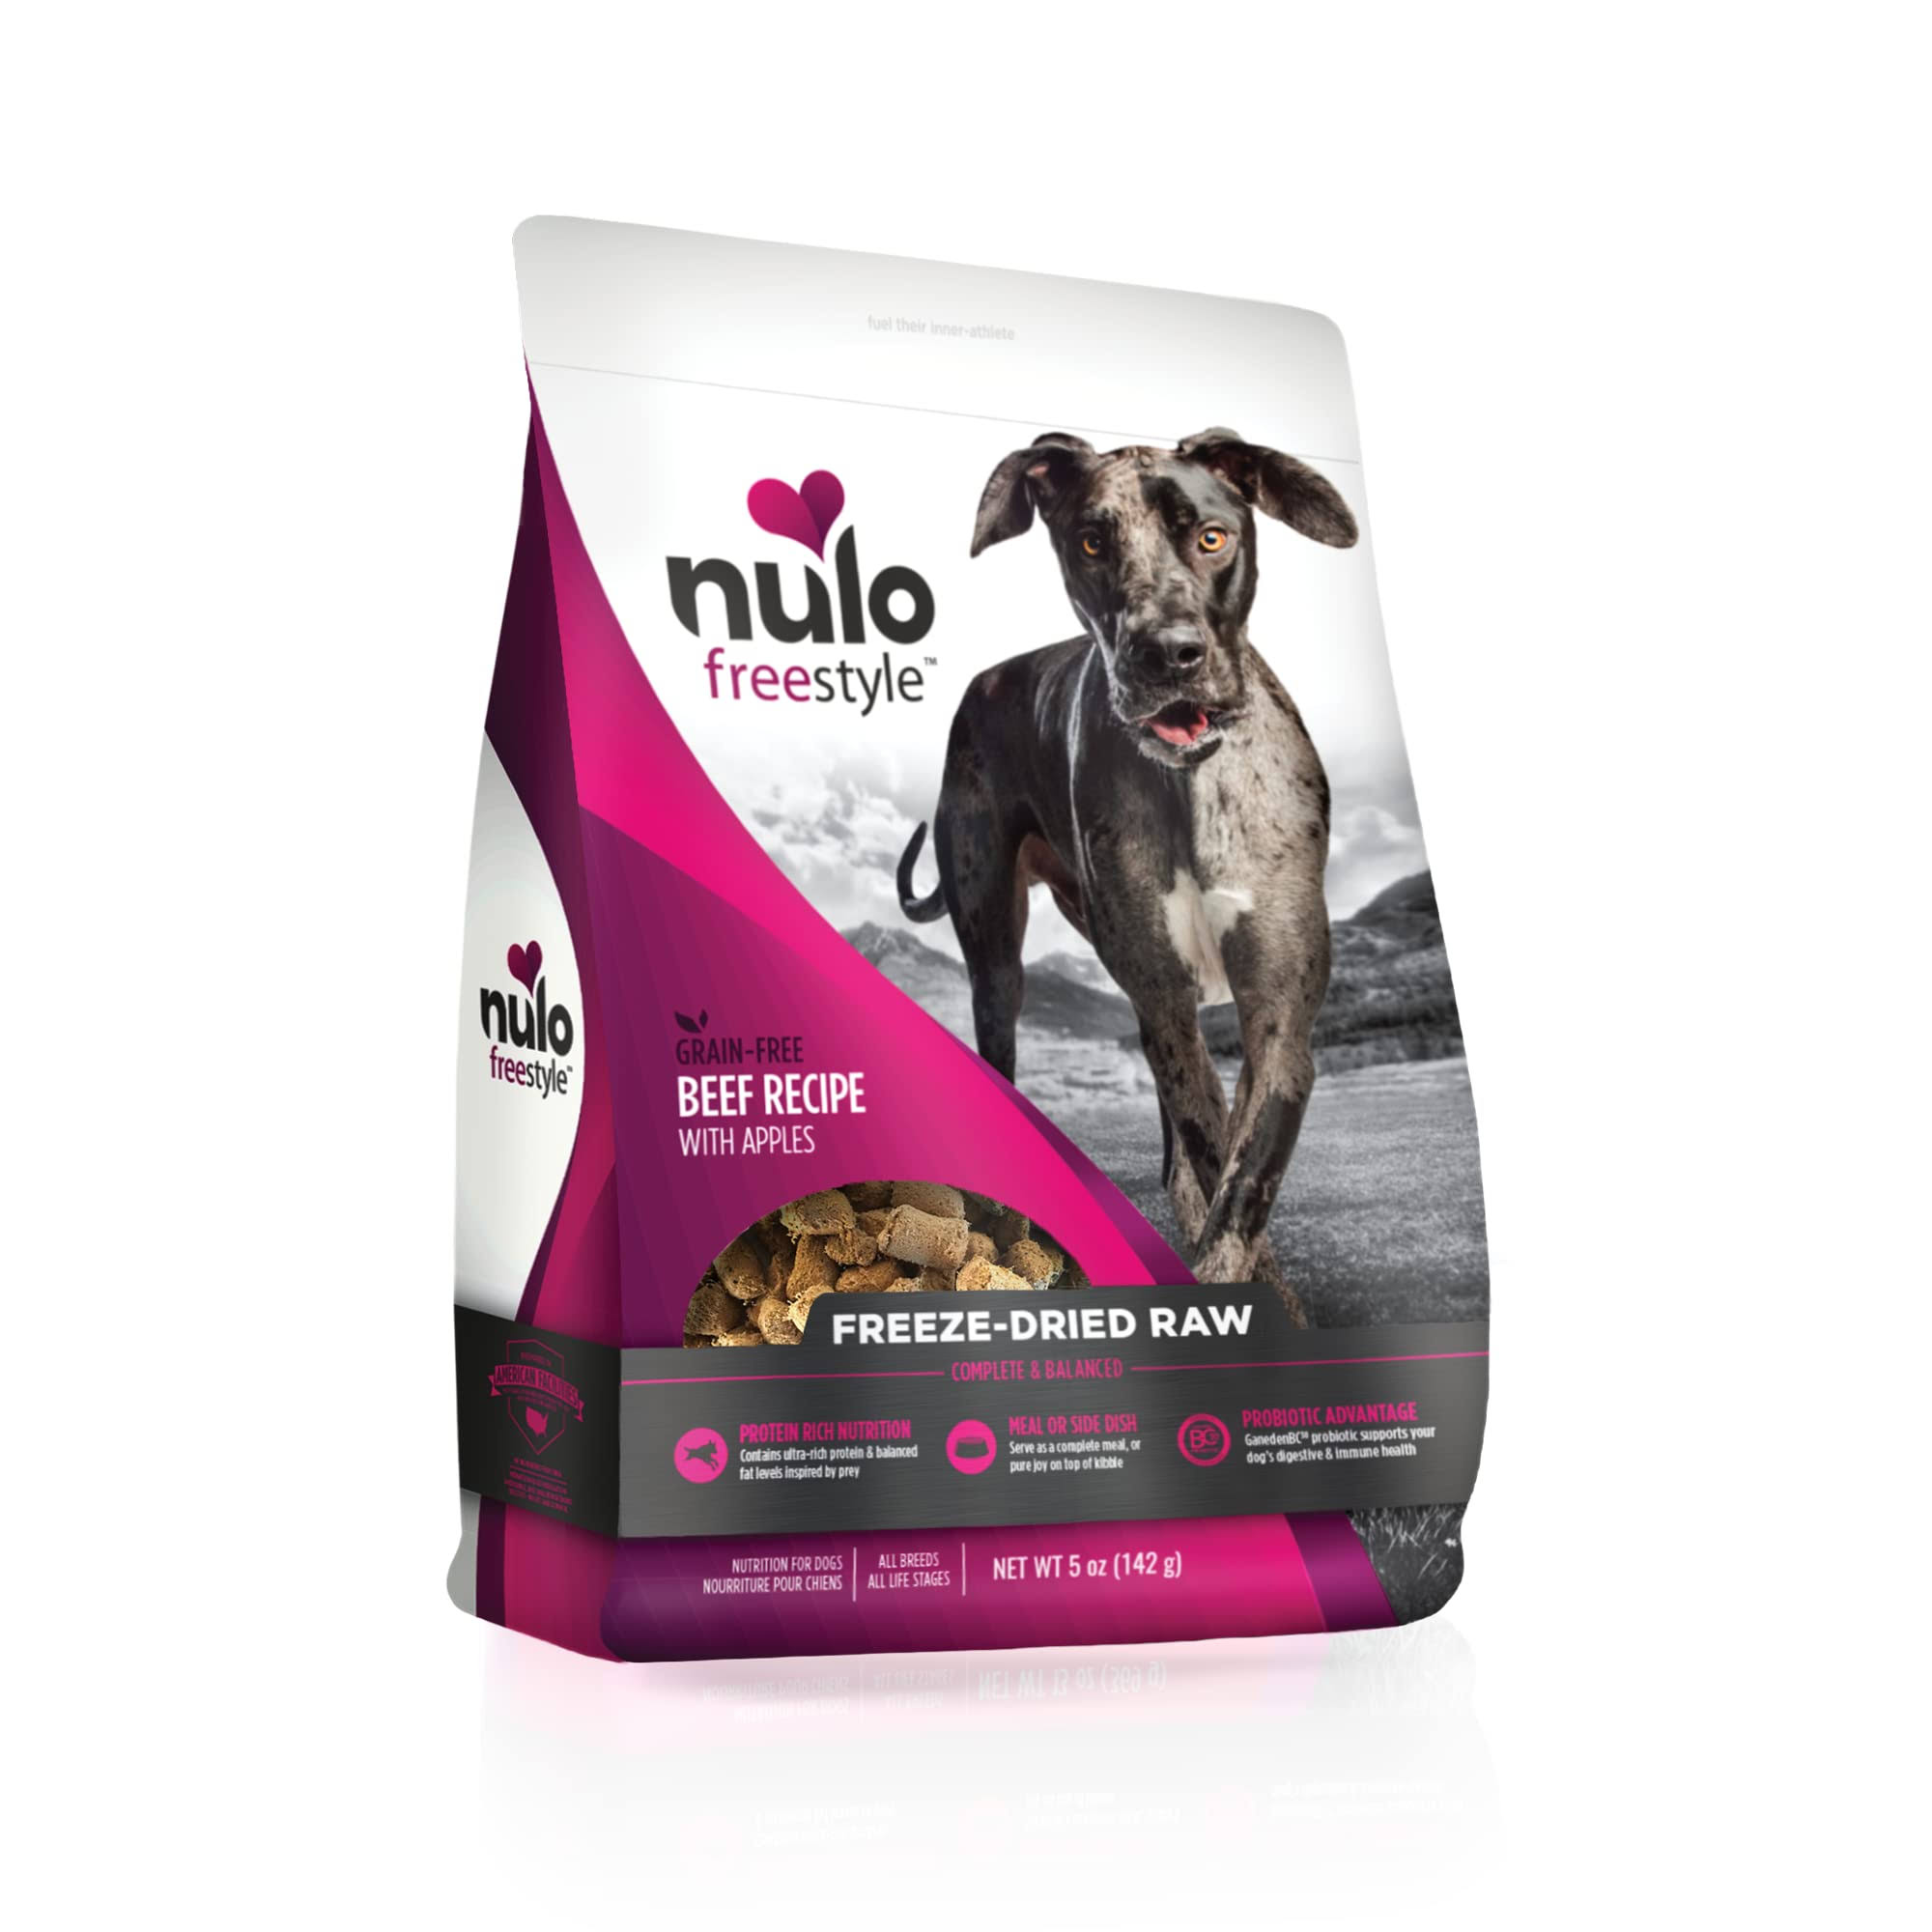 Nulo Freestyle Freeze-Dried Raw Beef with Apples Dog Food - 5 oz